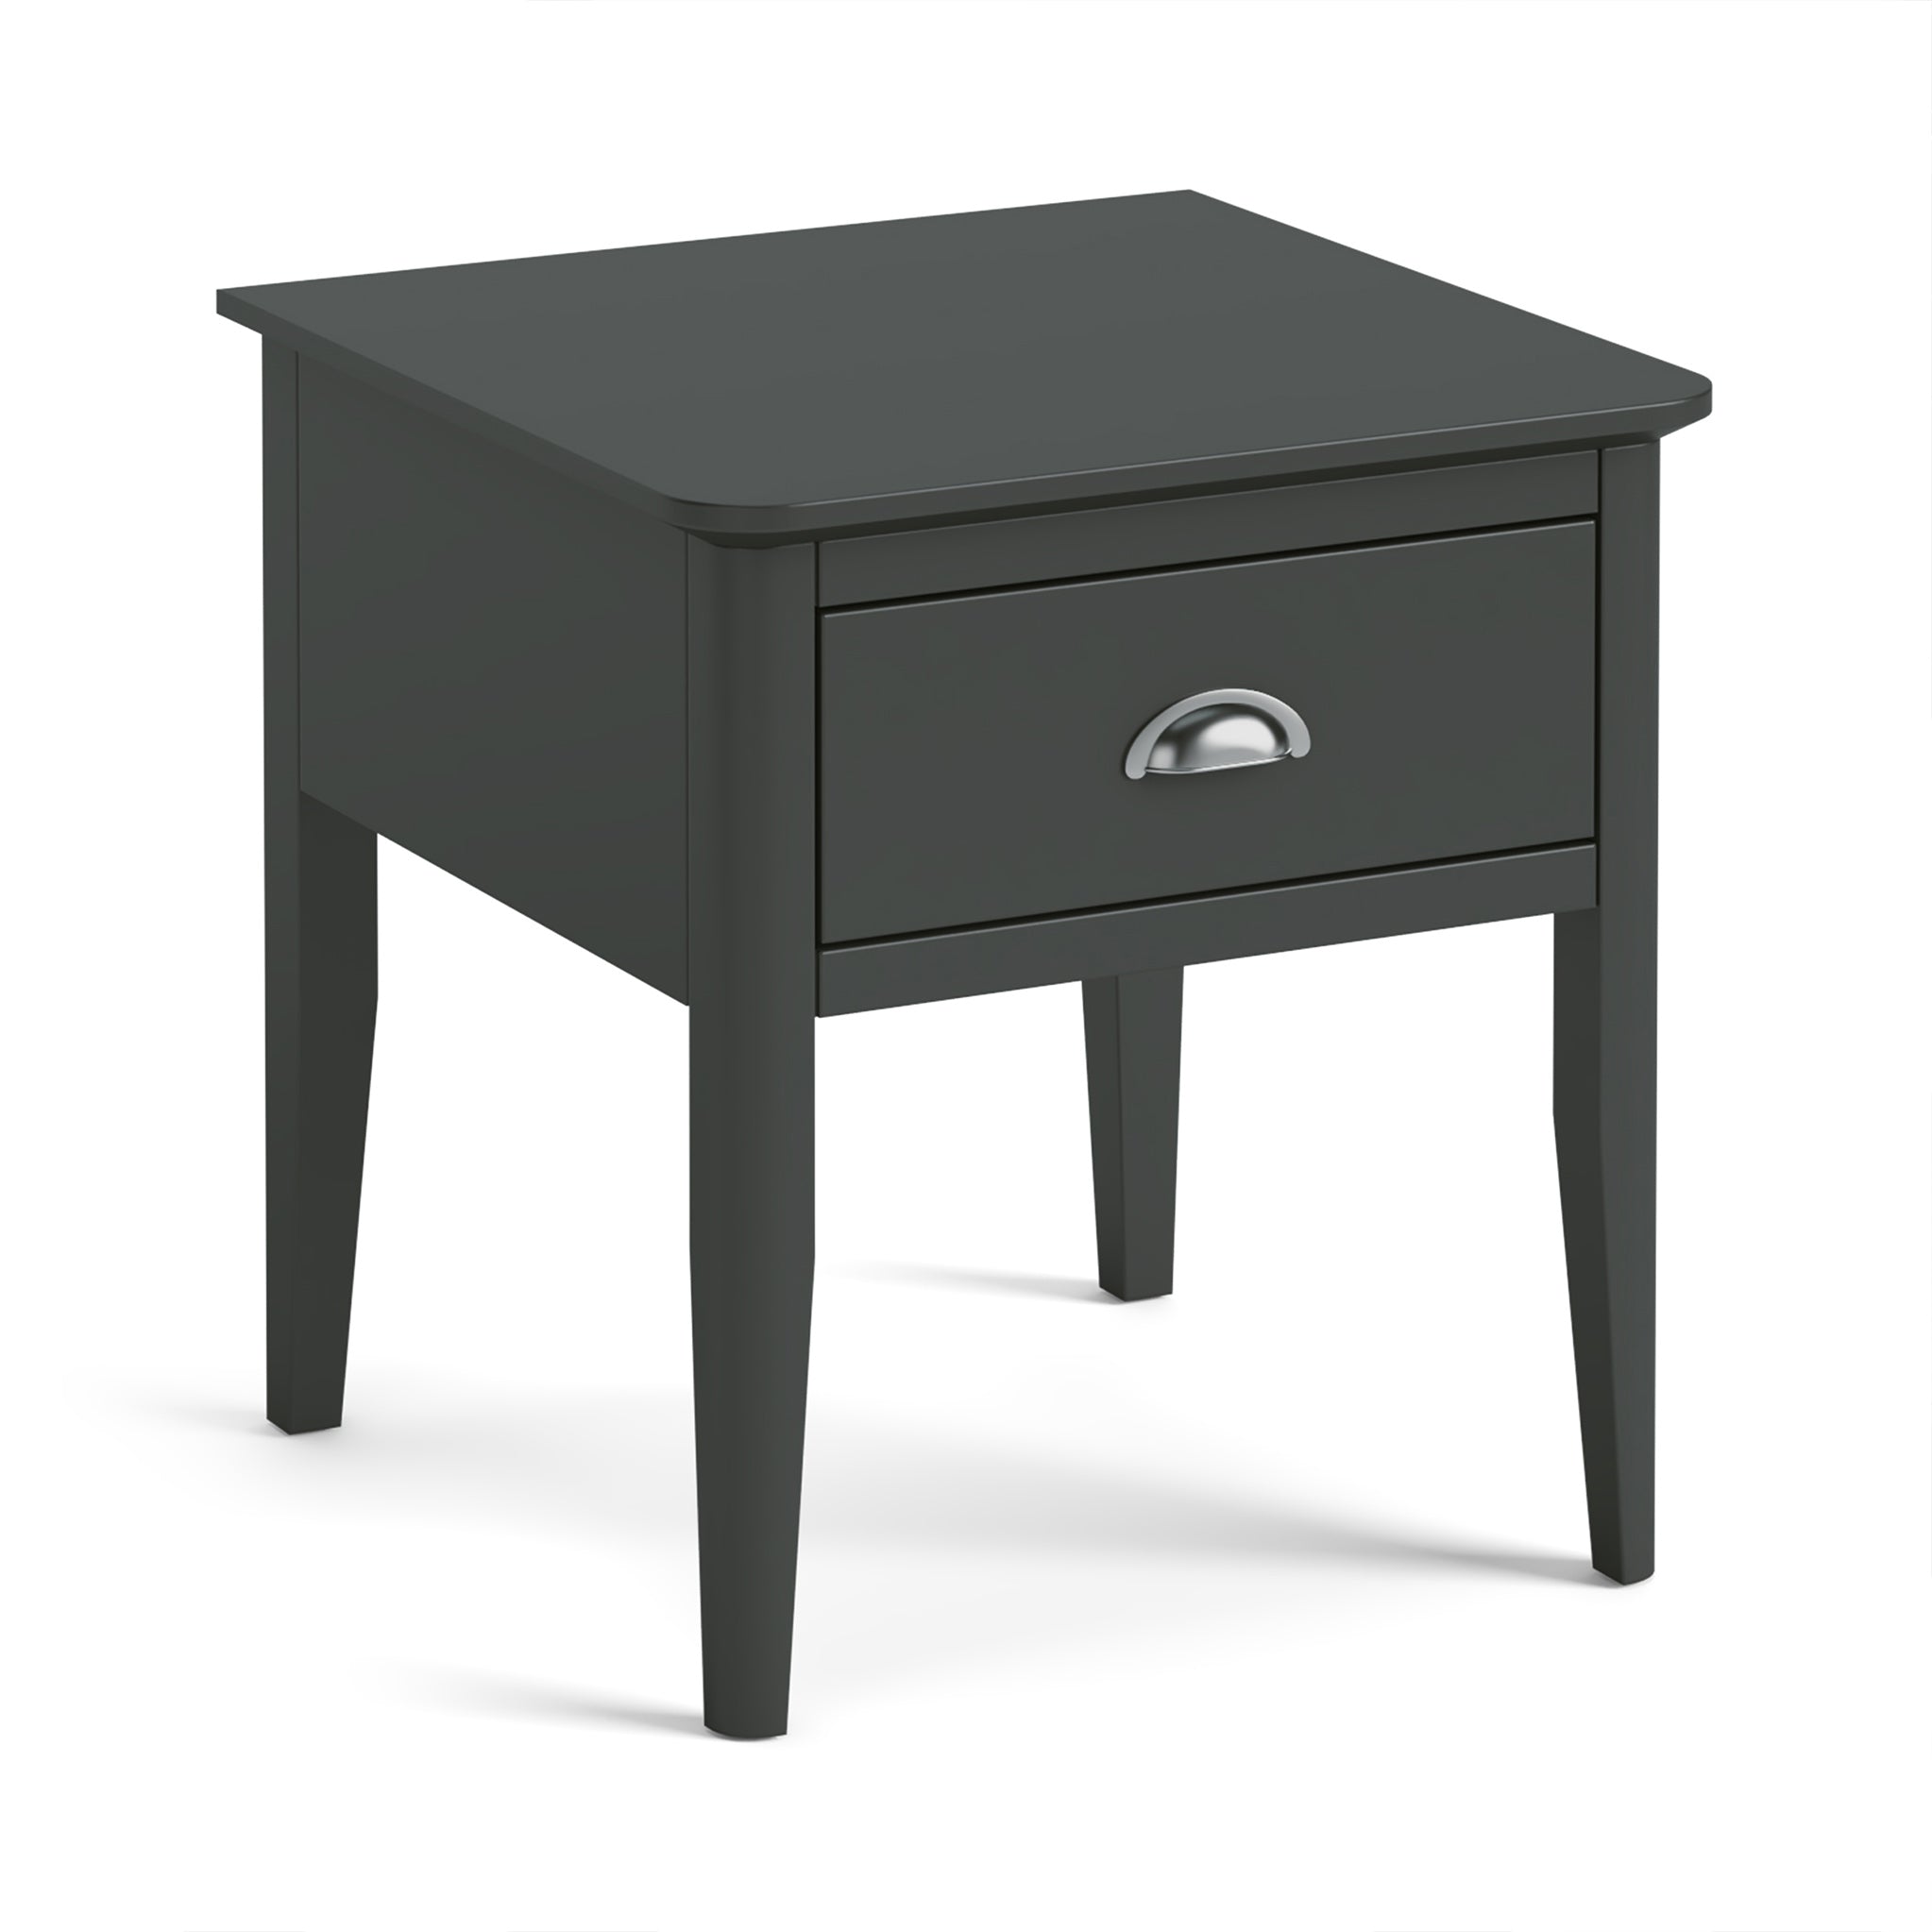 Dumbarton Charcoal Grey Scandi Side Lamp Table With Drawer Contemporary Painted Solid Pine Wooden Living Room End Sofa Stand